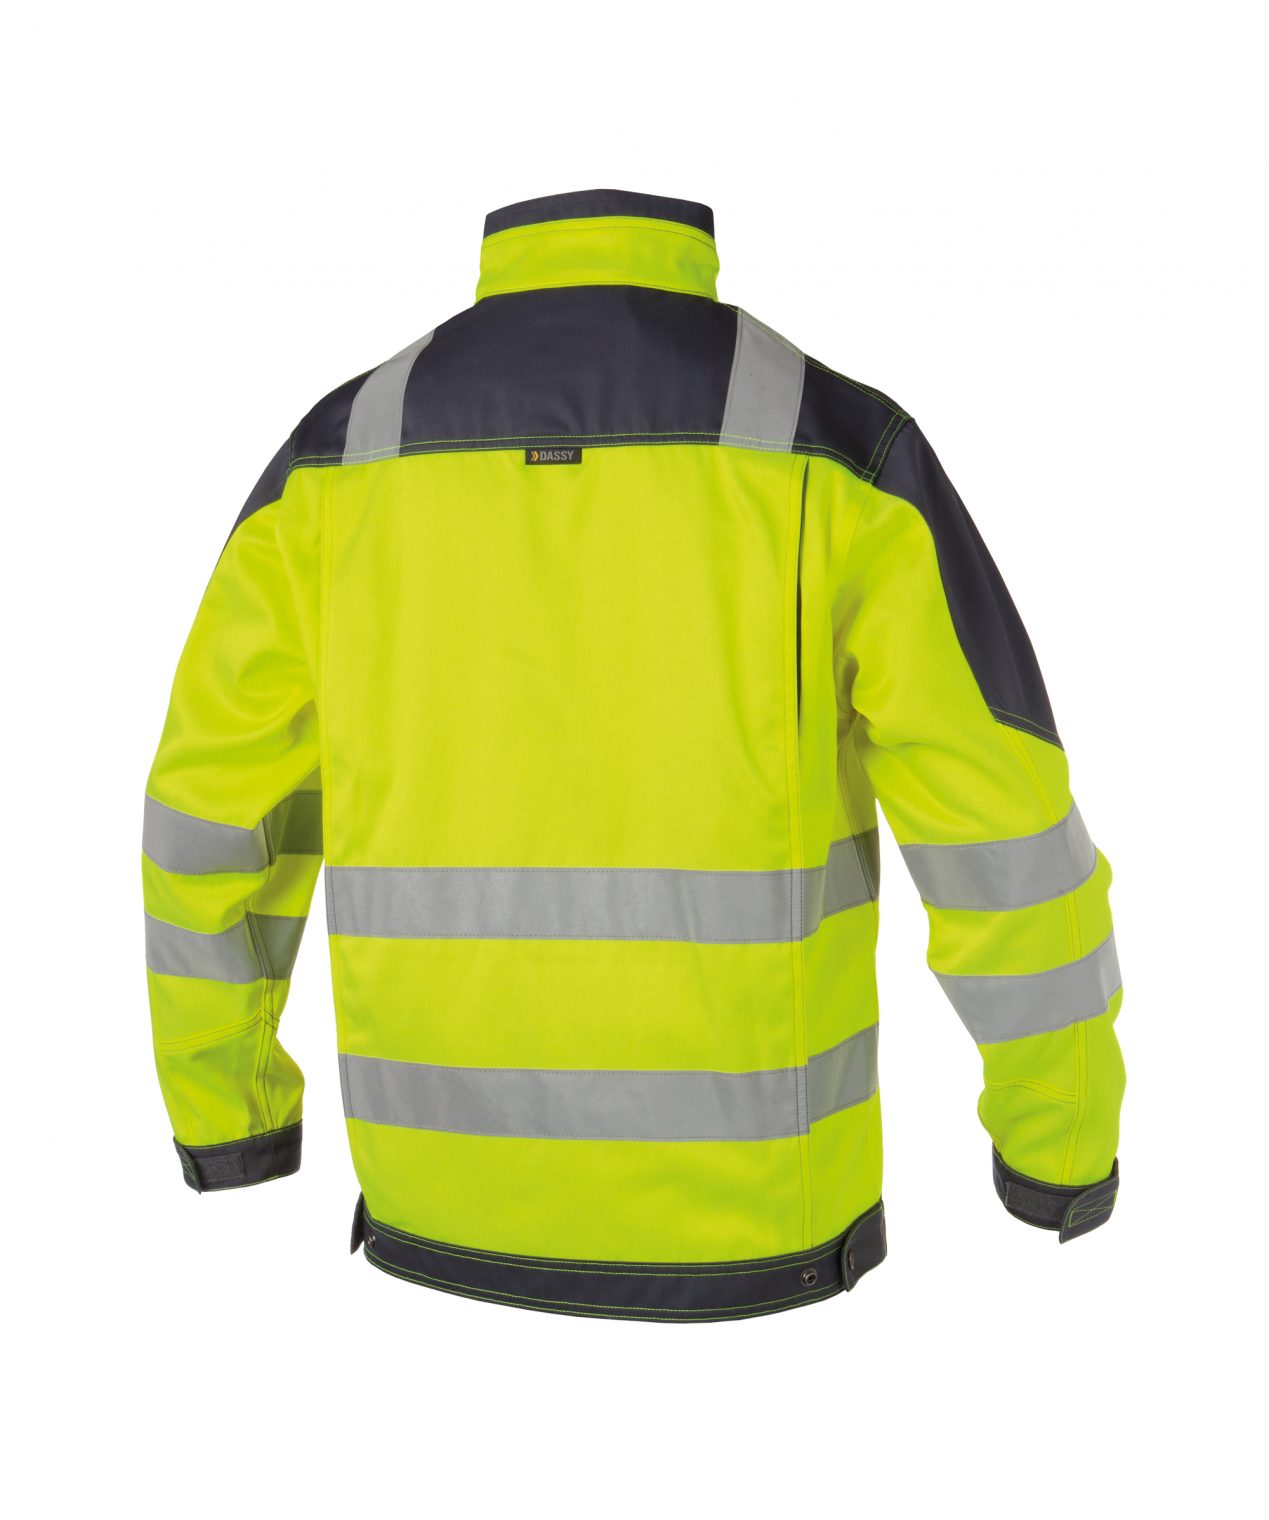 orlando high visibility work jacket fluo yellow cement grey back